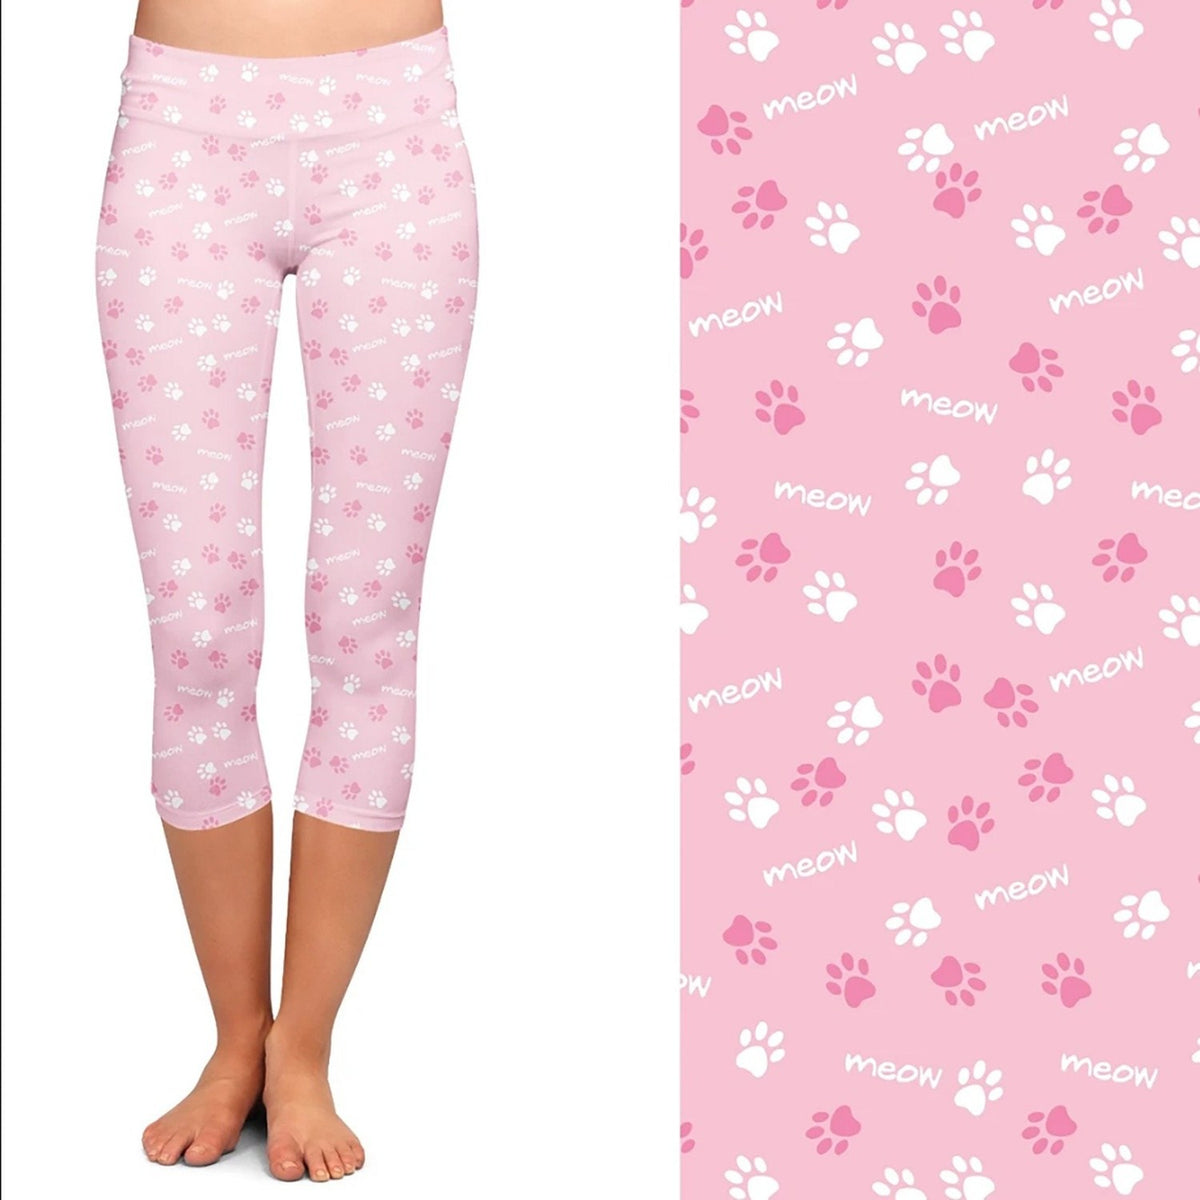 Meow Cat Leggings Meow Kitty Cats Capri Pink and White with Pockets